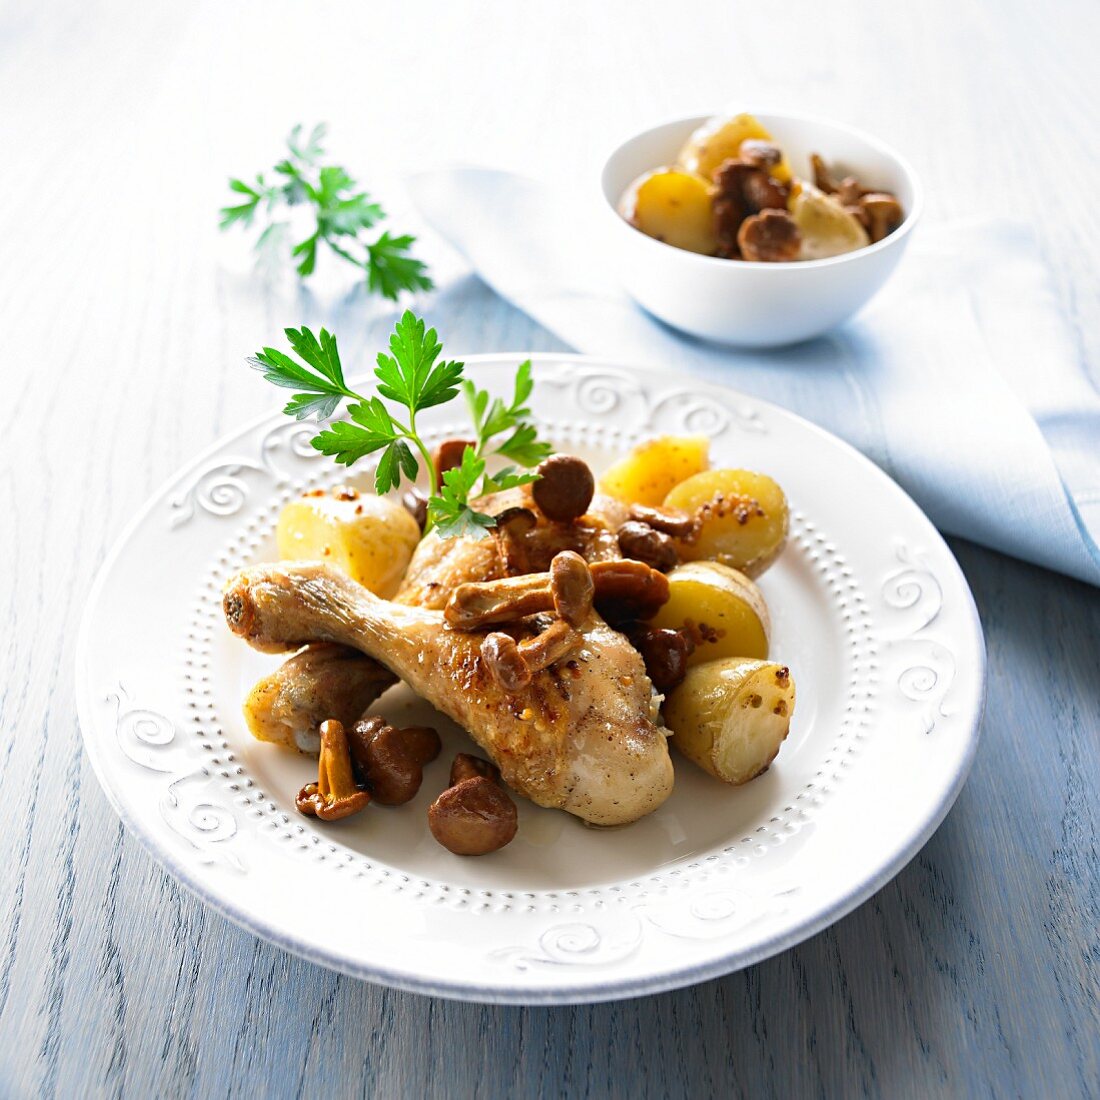 Chicken legs with chanterelle mushrooms and potatoes